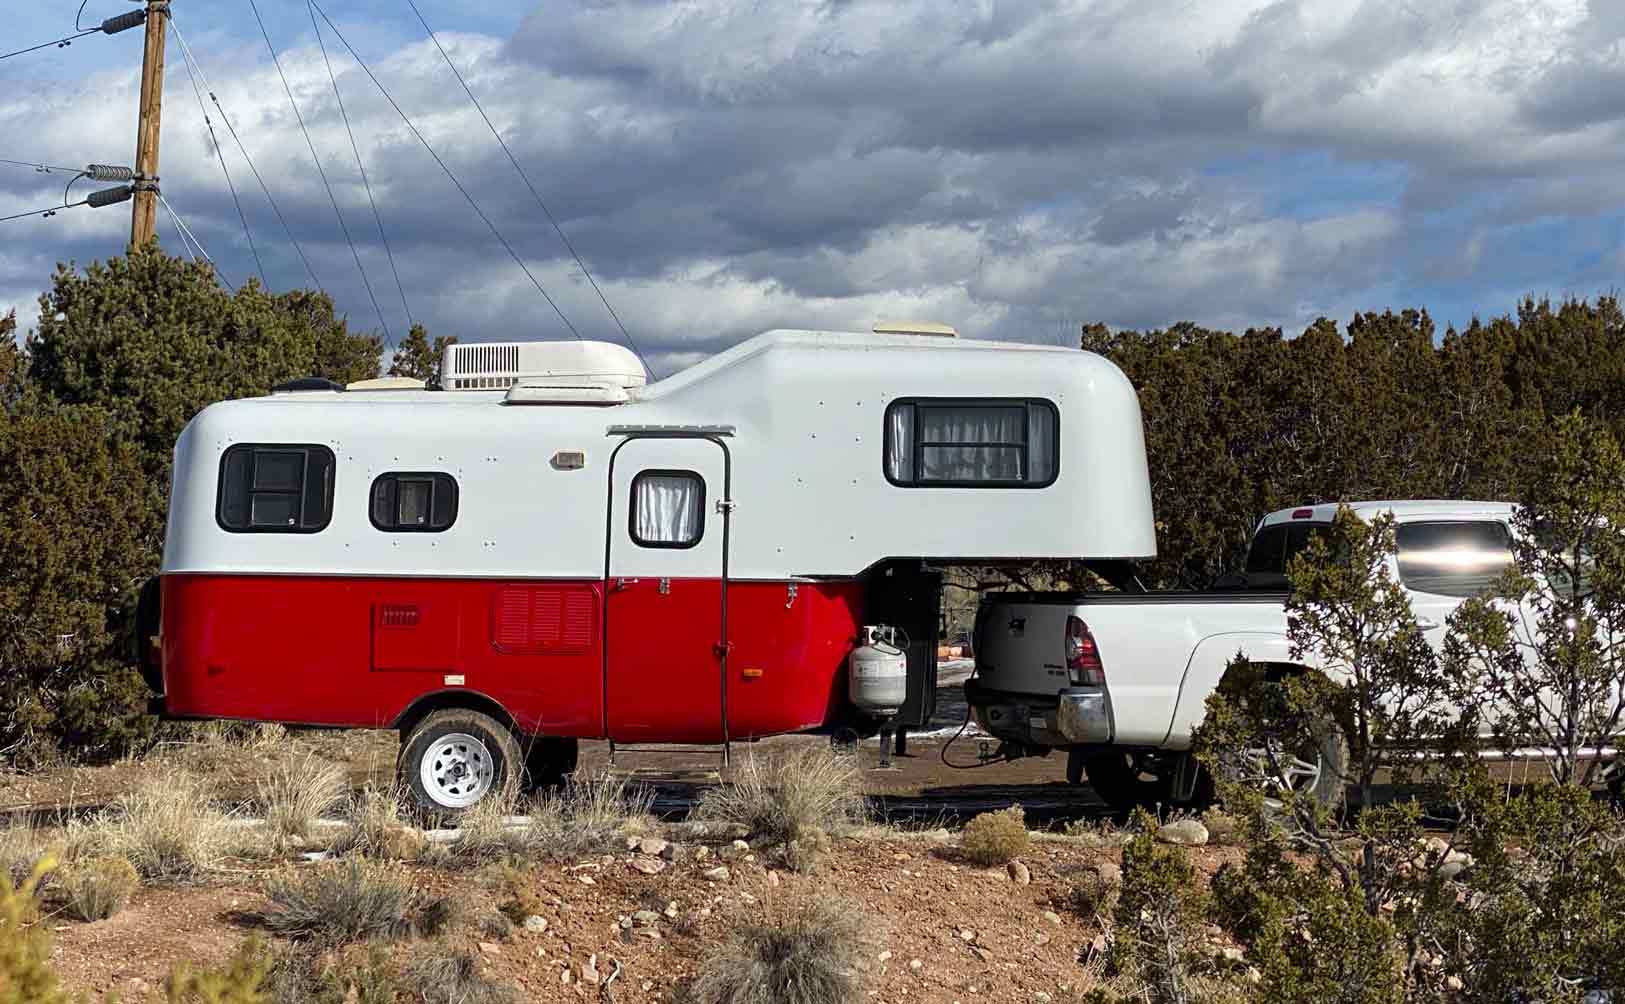 small fifth wheel campers